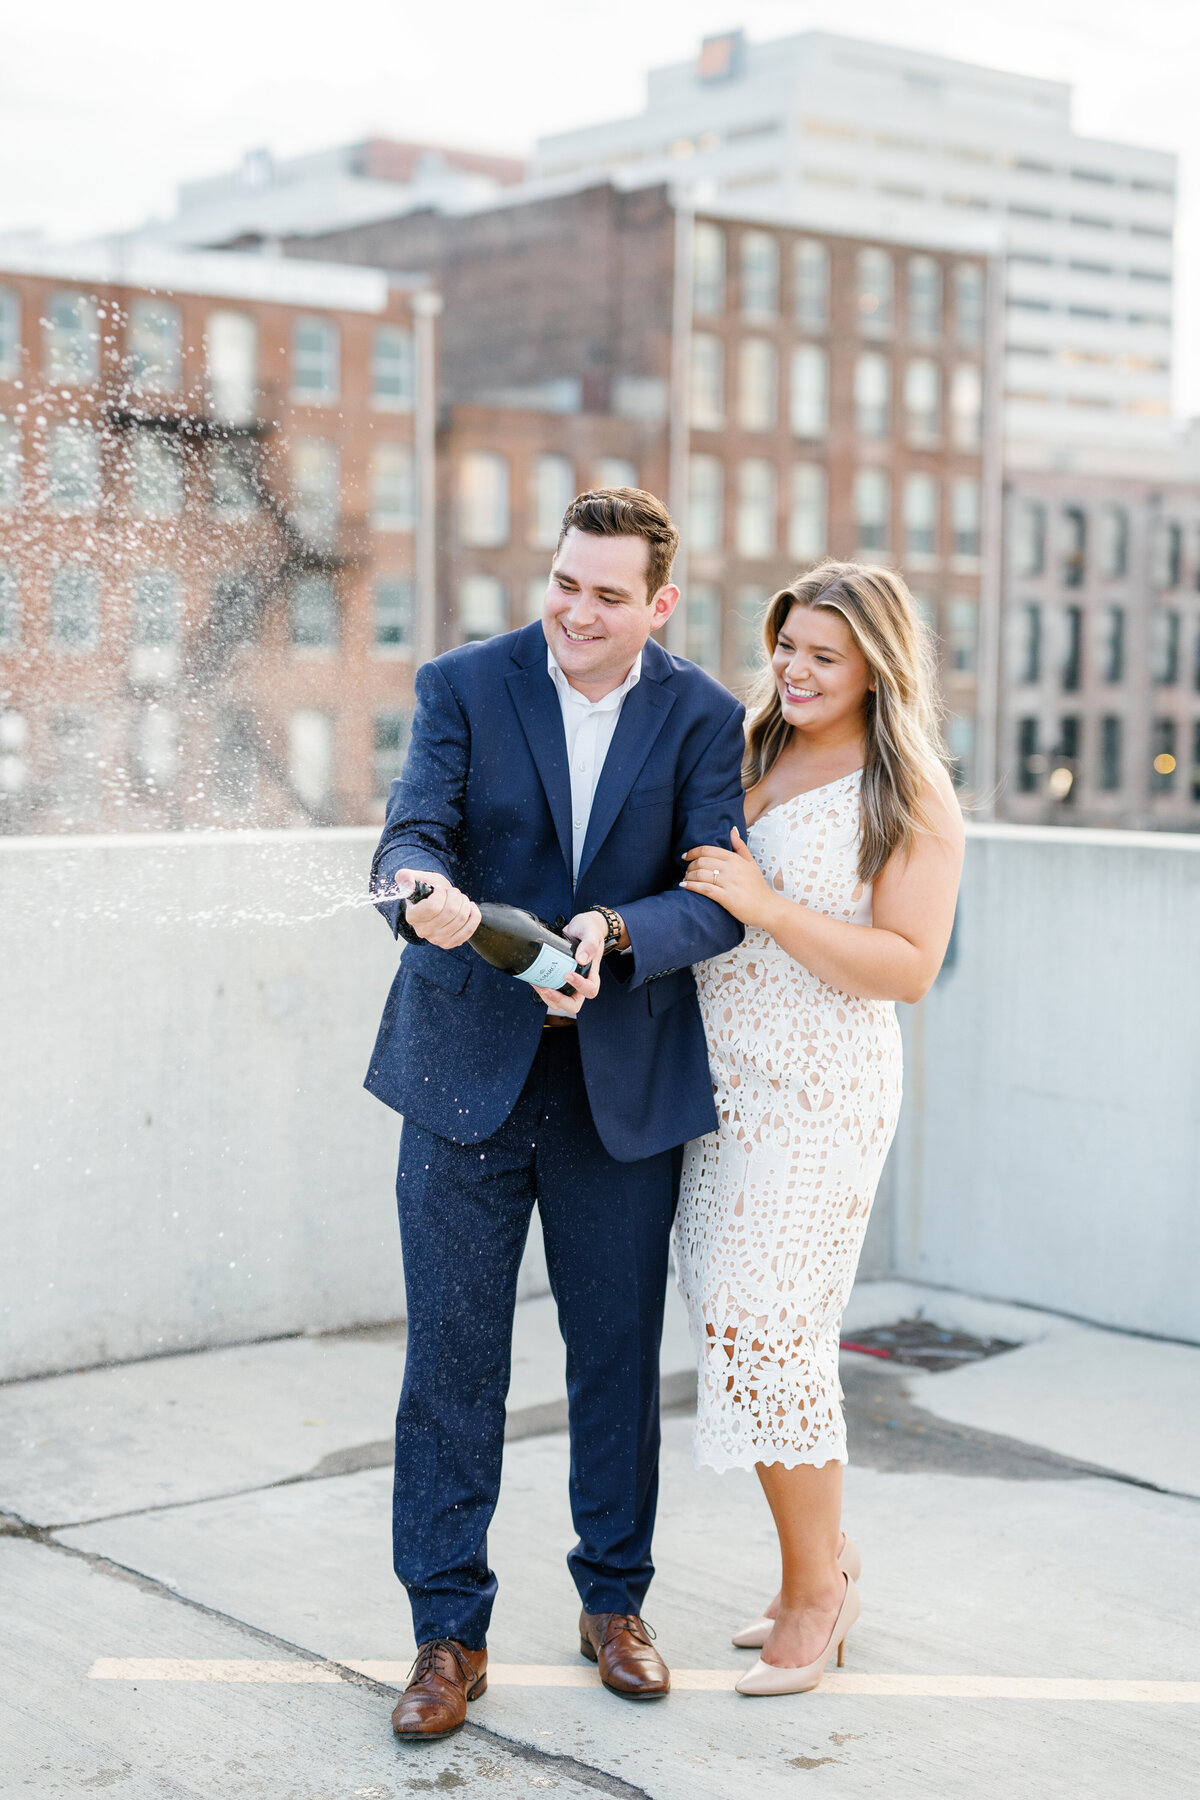 Paige and Tommy Engagement Sesison - Downtown Knoxville Tennessee - East Tennessee Wedding Photographer - Alaina René Photohgraphy-130